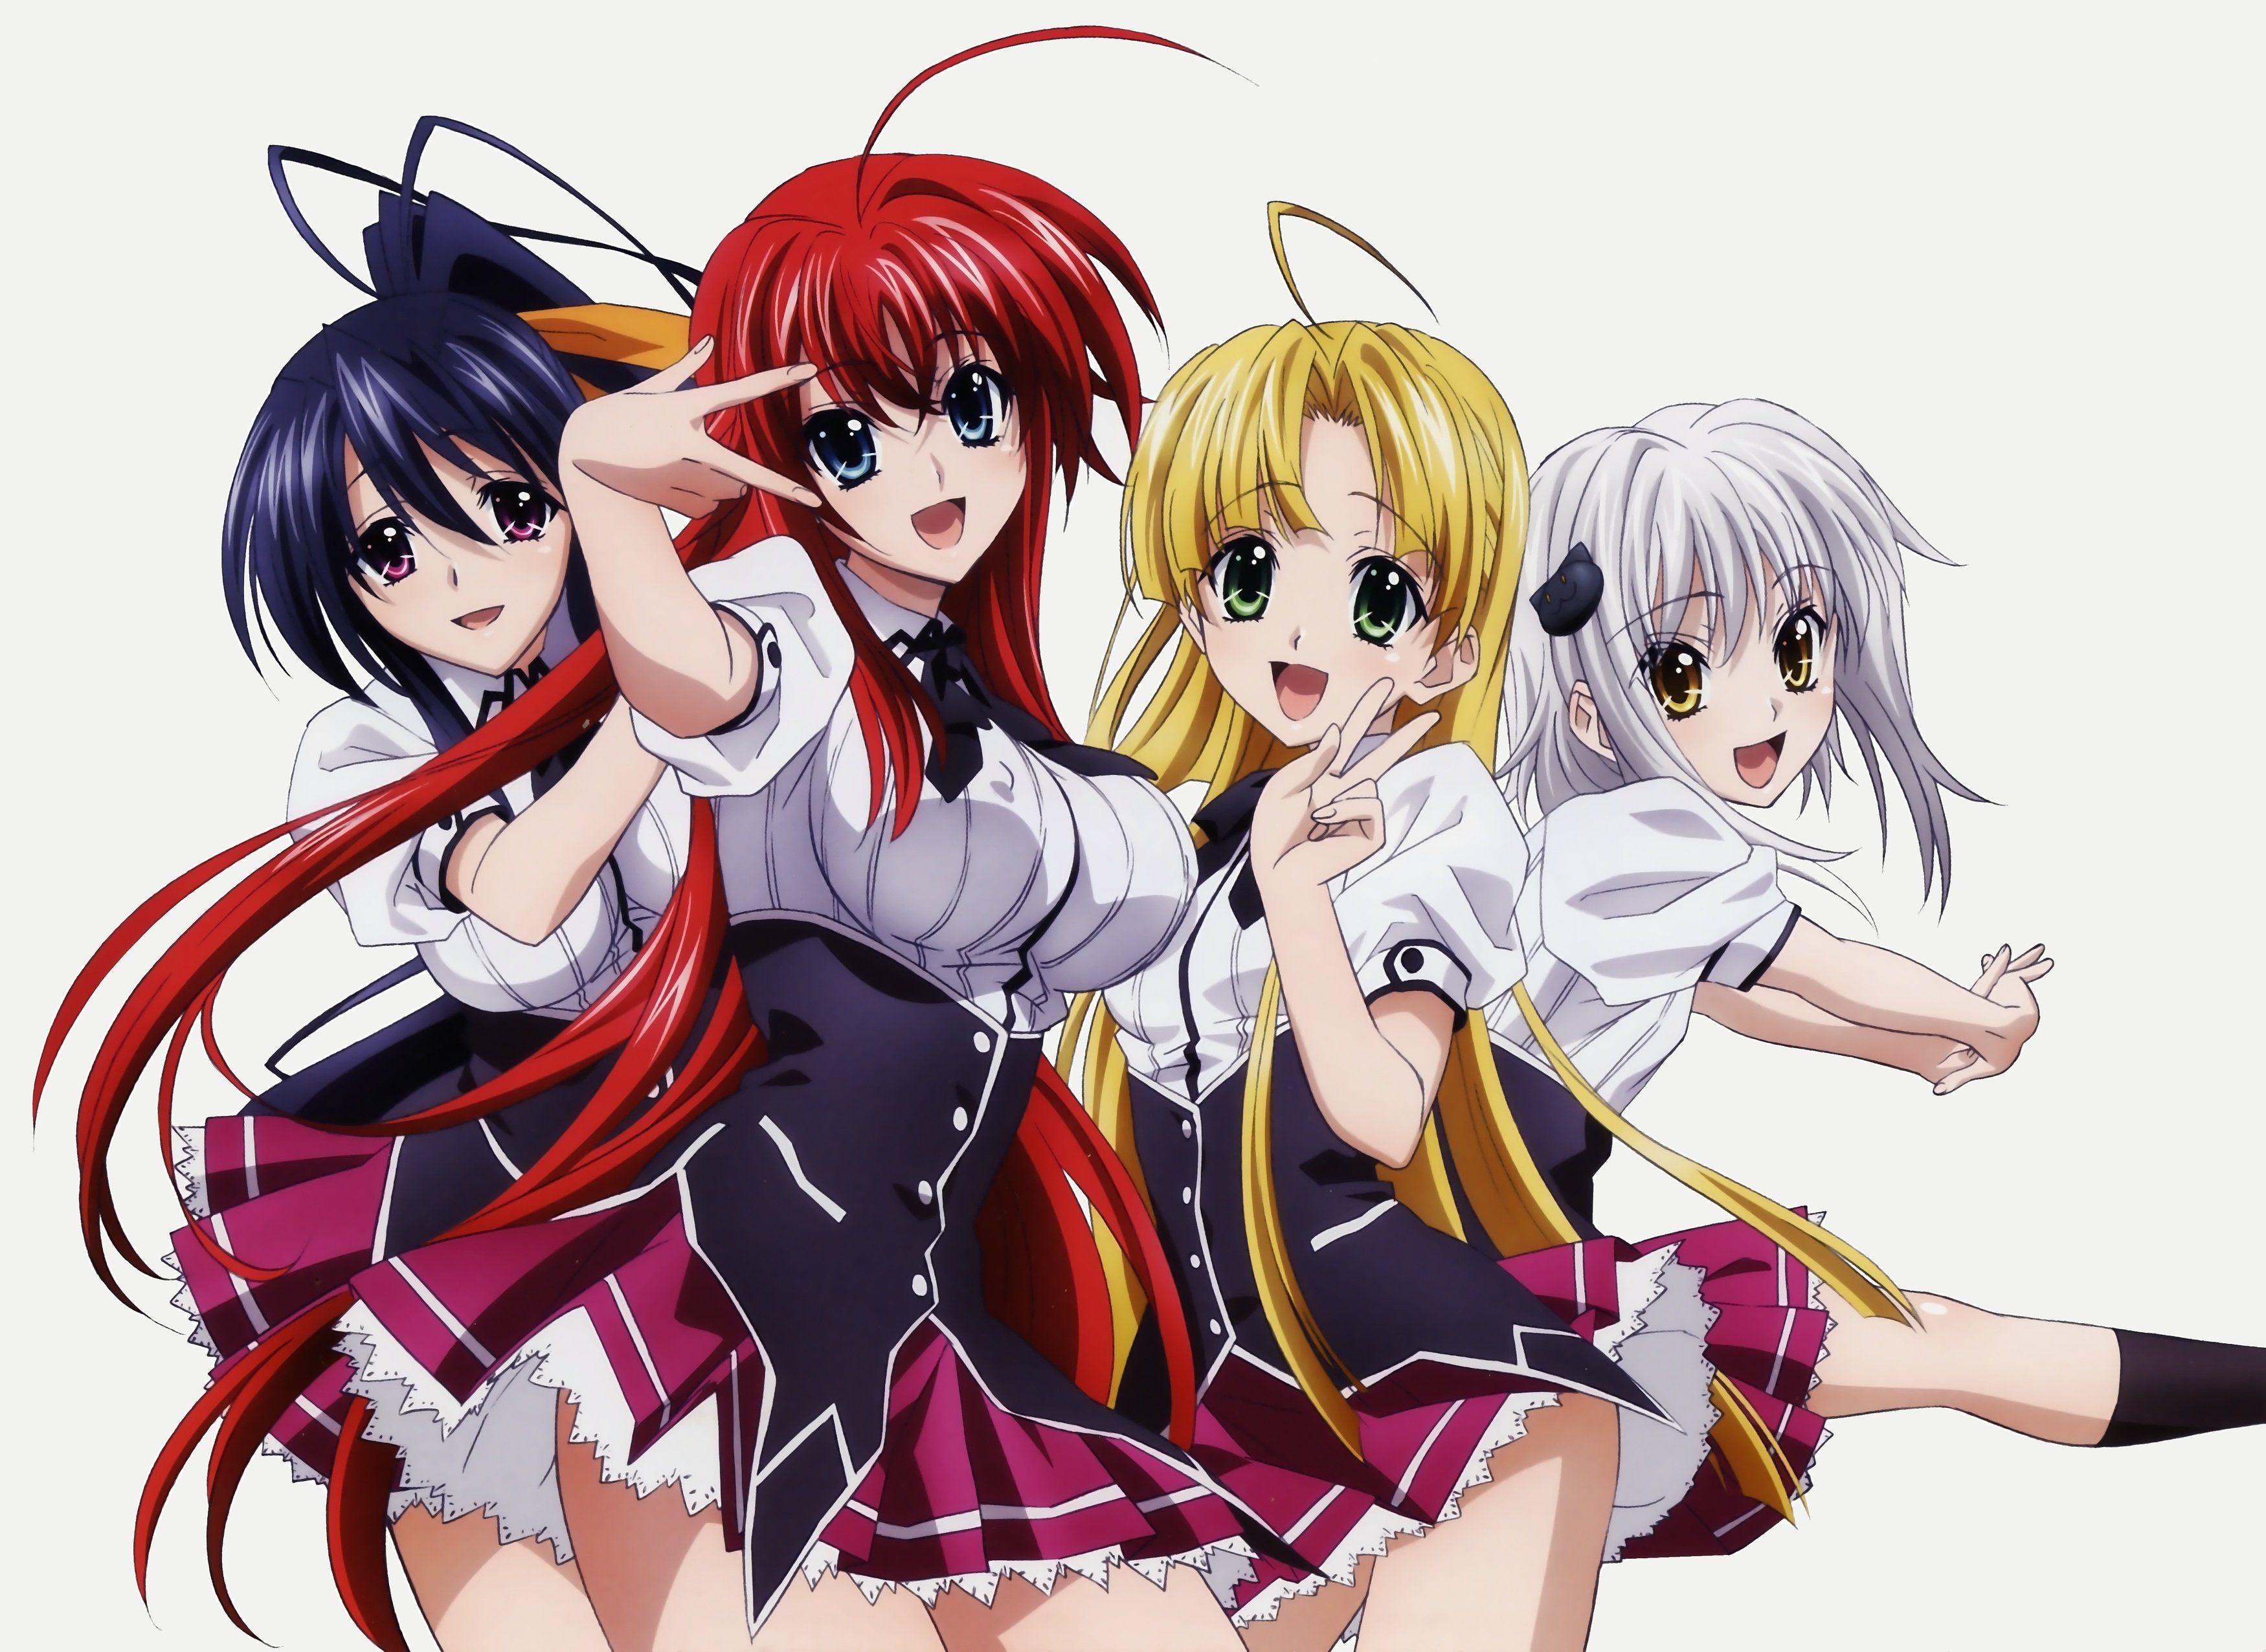 5. Rias Gremory from High School DxD - wide 8